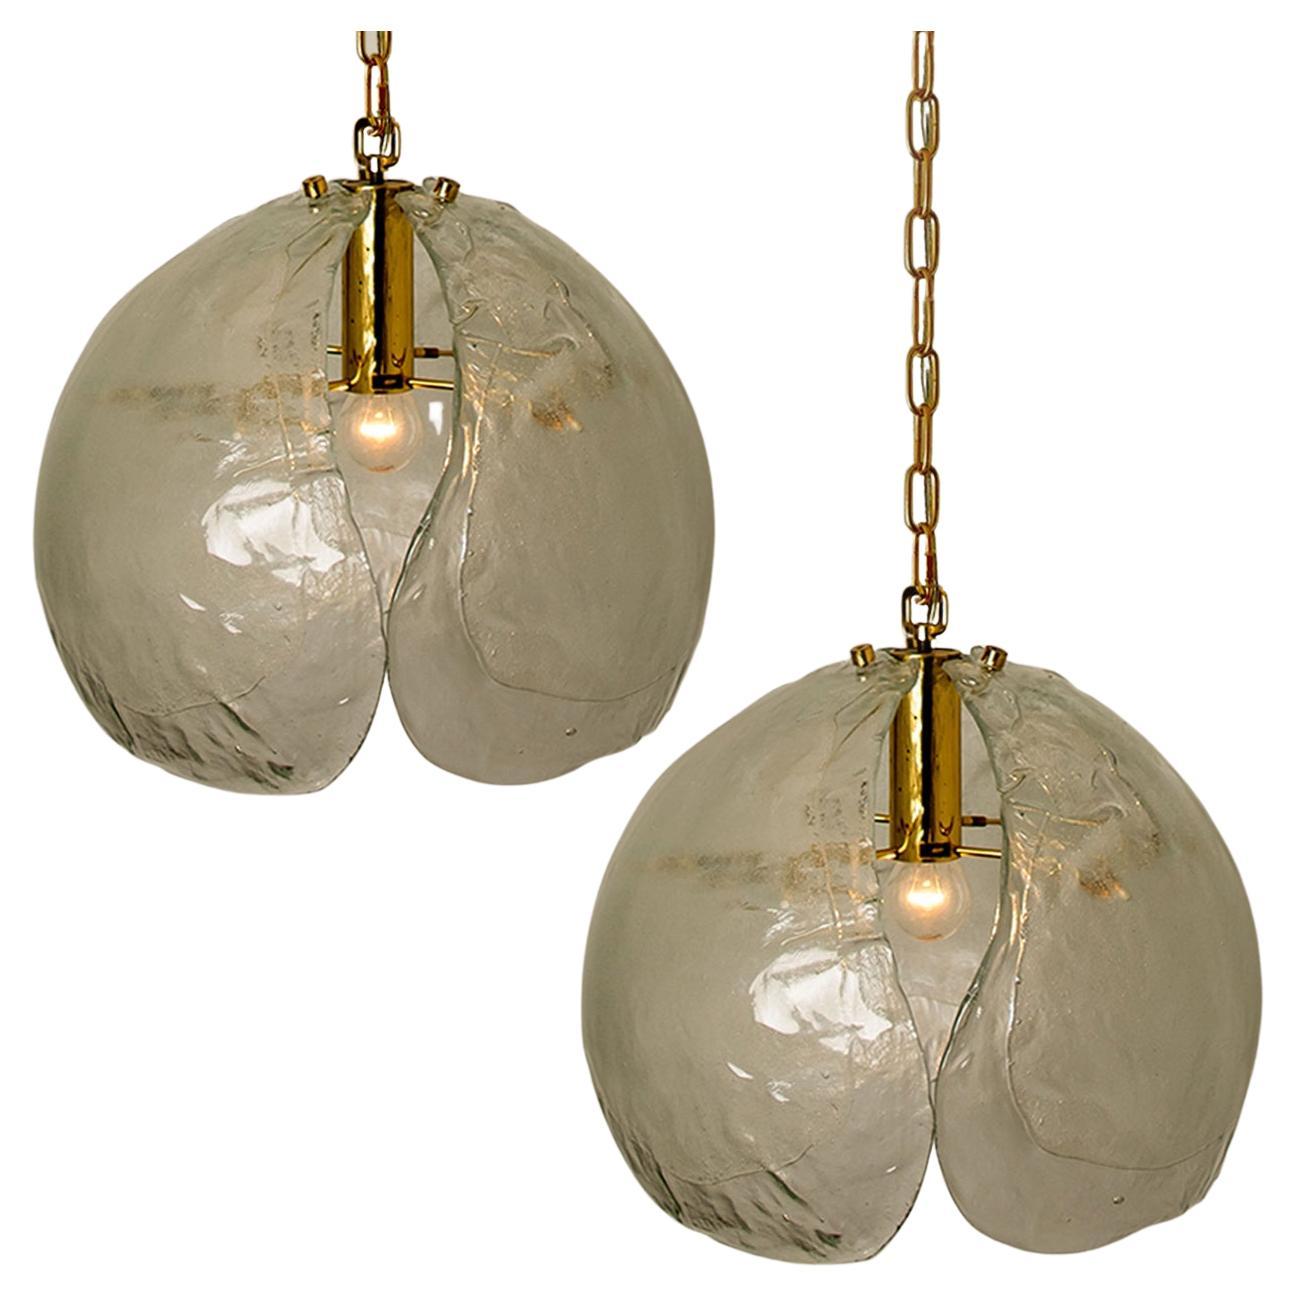 A nice pair of pendant lights in the style of Kalmar. Three clear murano glasses are mounted on a brass fixture.
The hand blown leaves are refracting the light in a beautiful way. It fills the room with a soft and welcoming glow.

Measures: